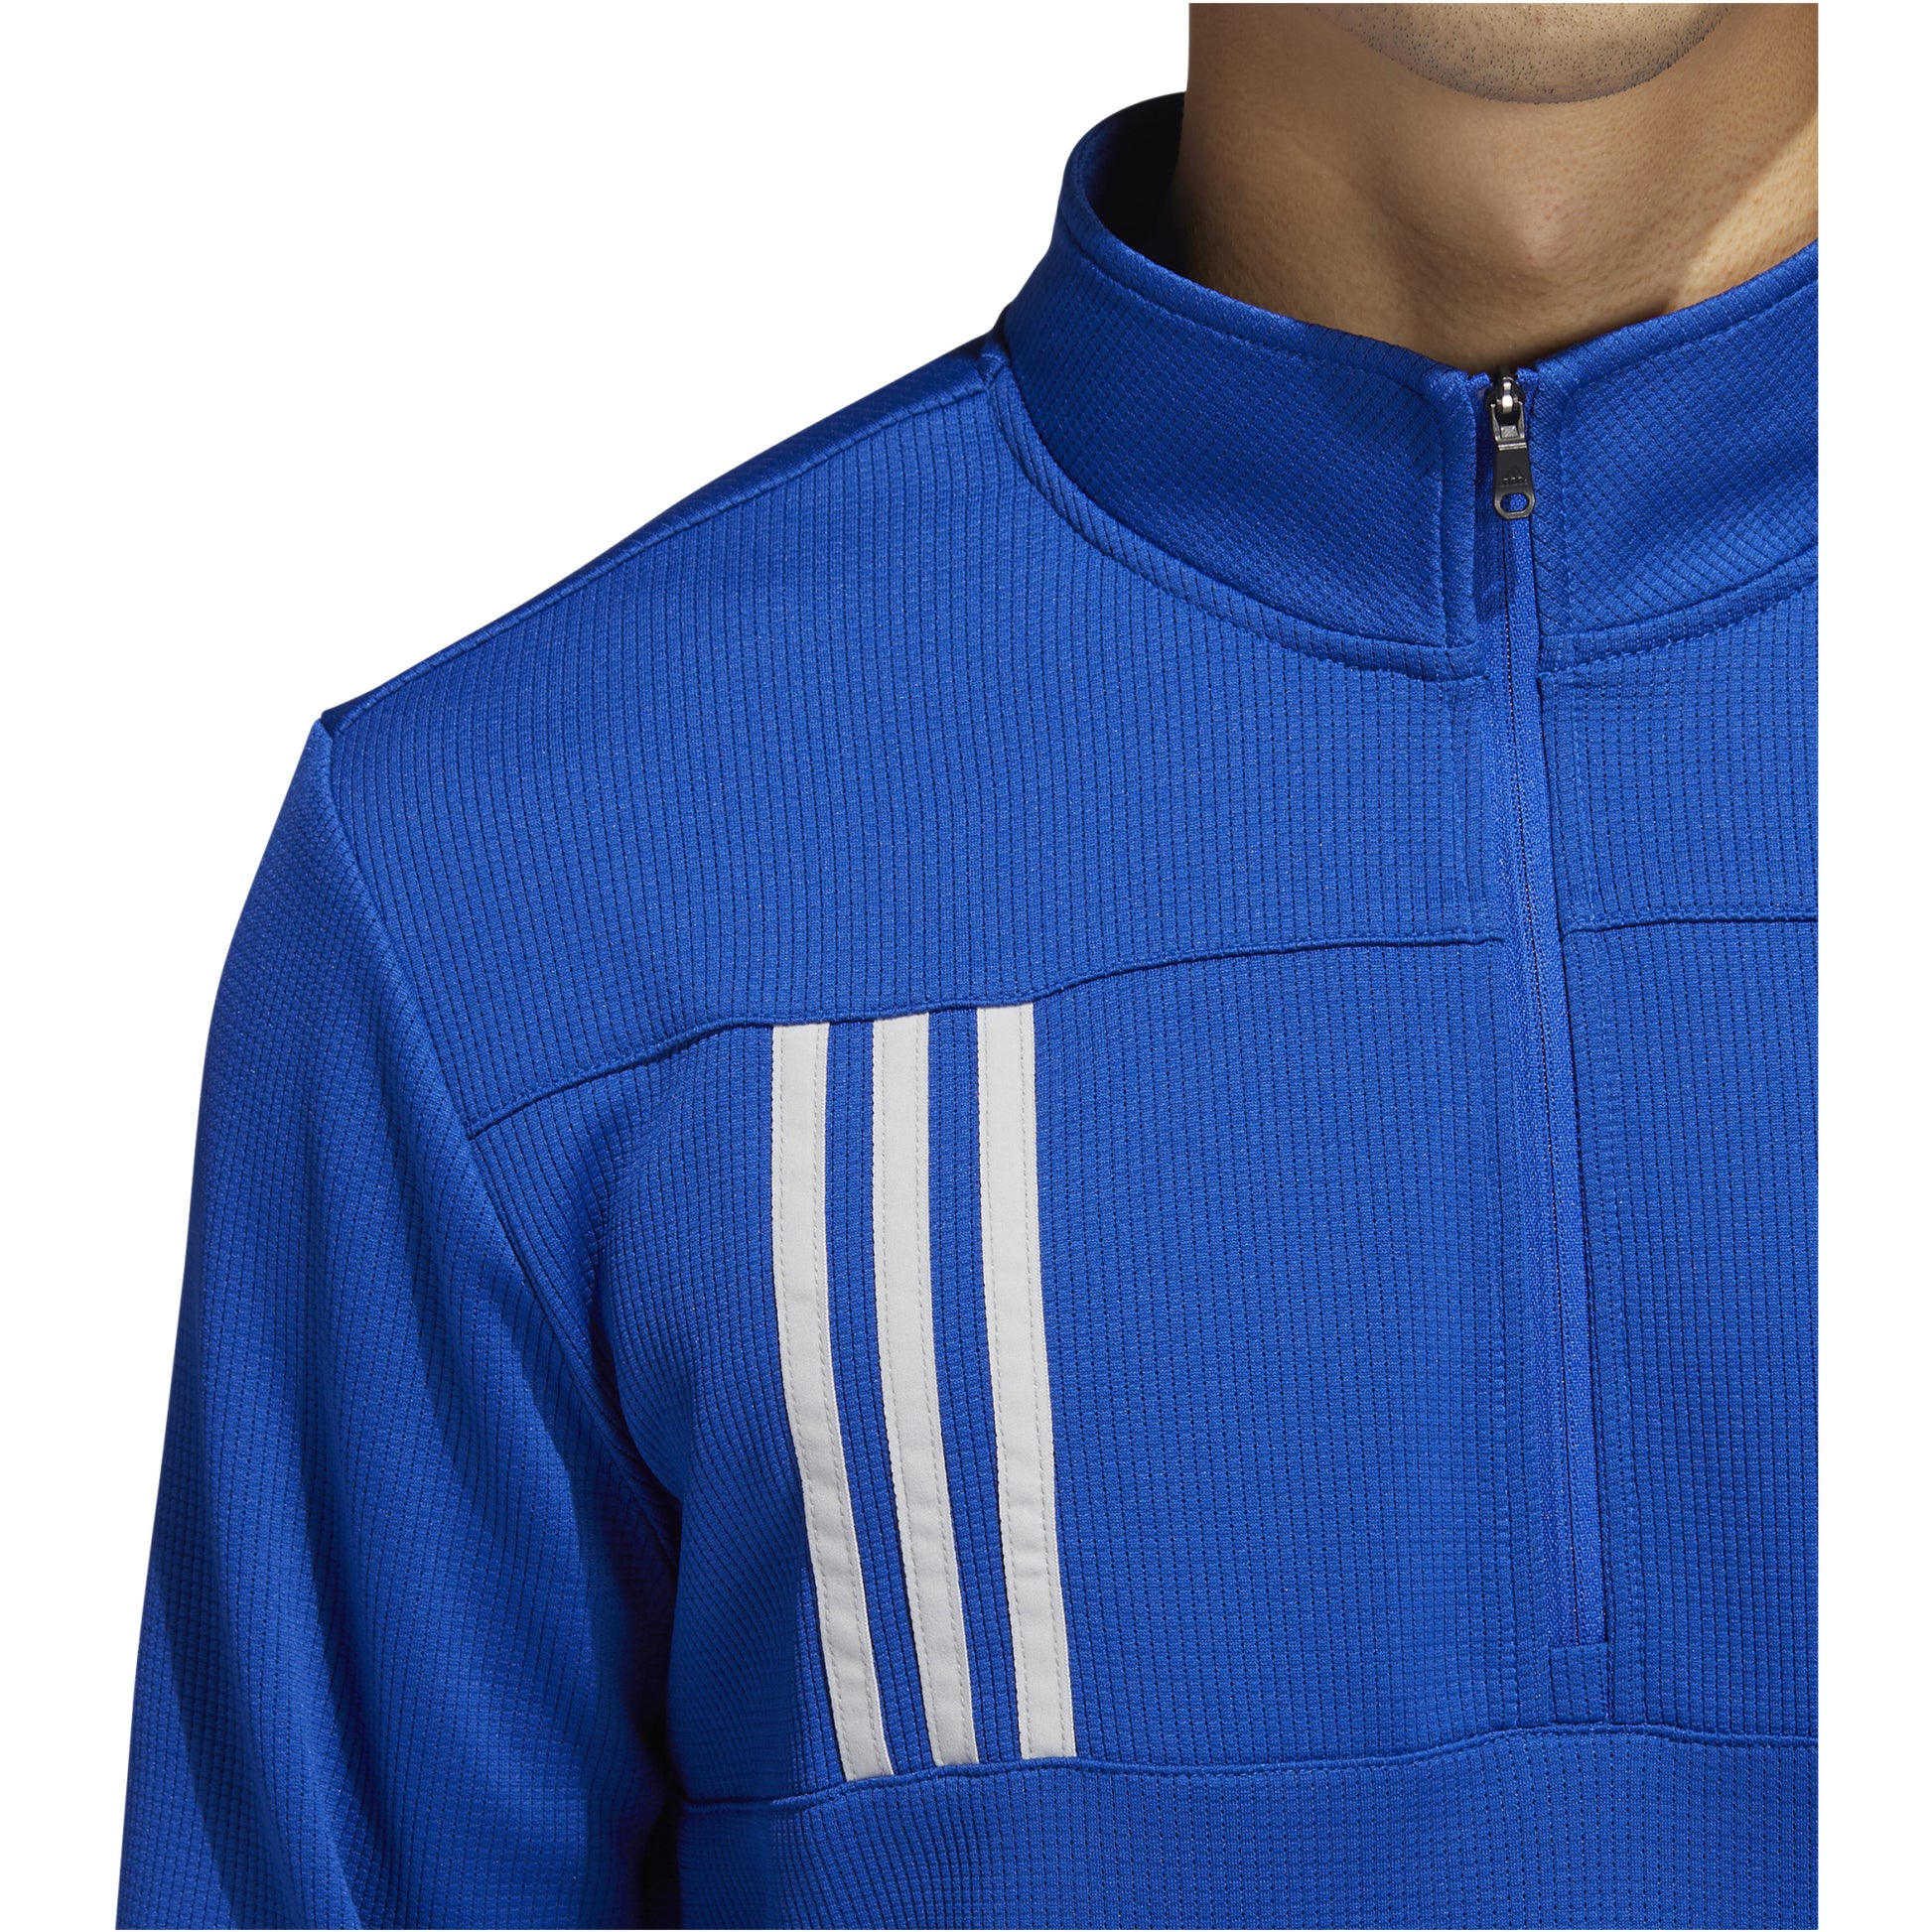 3-Stripes Textured 1/4 – Golf Pullover Team Products Zip